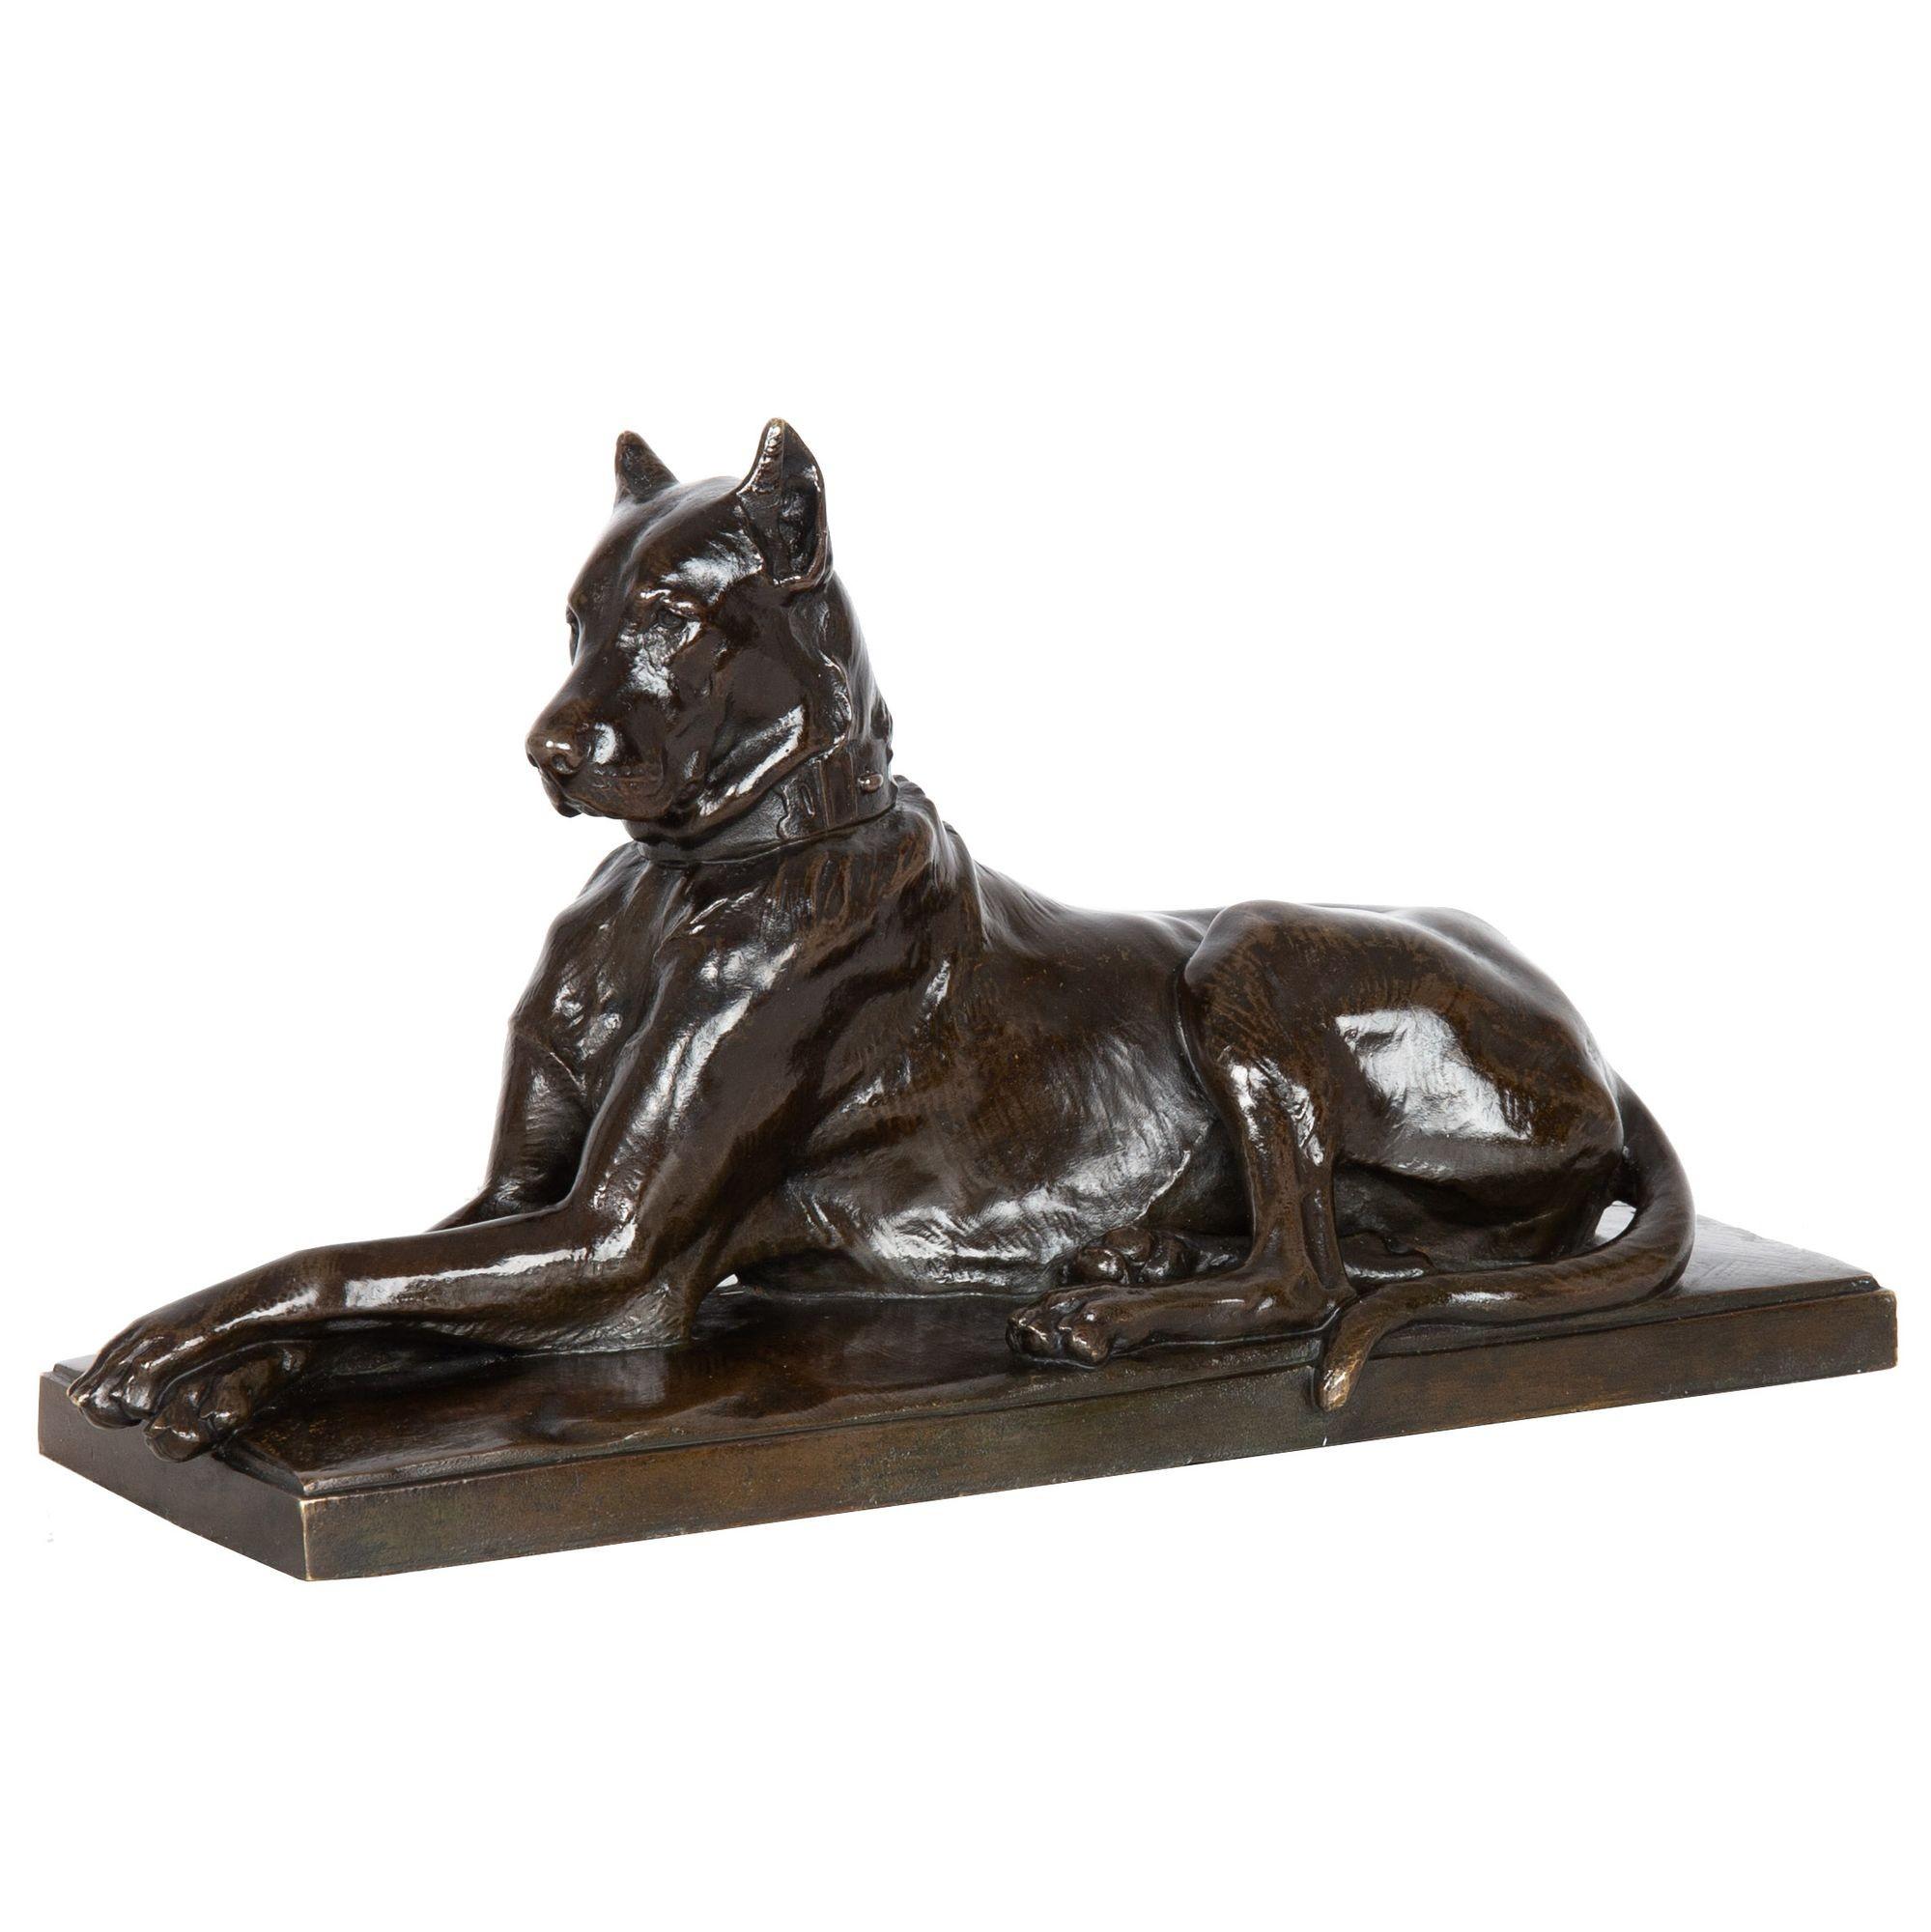 GEORGES GARDET
French, 1863-1939

Recumbent Great Dane

Patinated bronze  signed in cast 